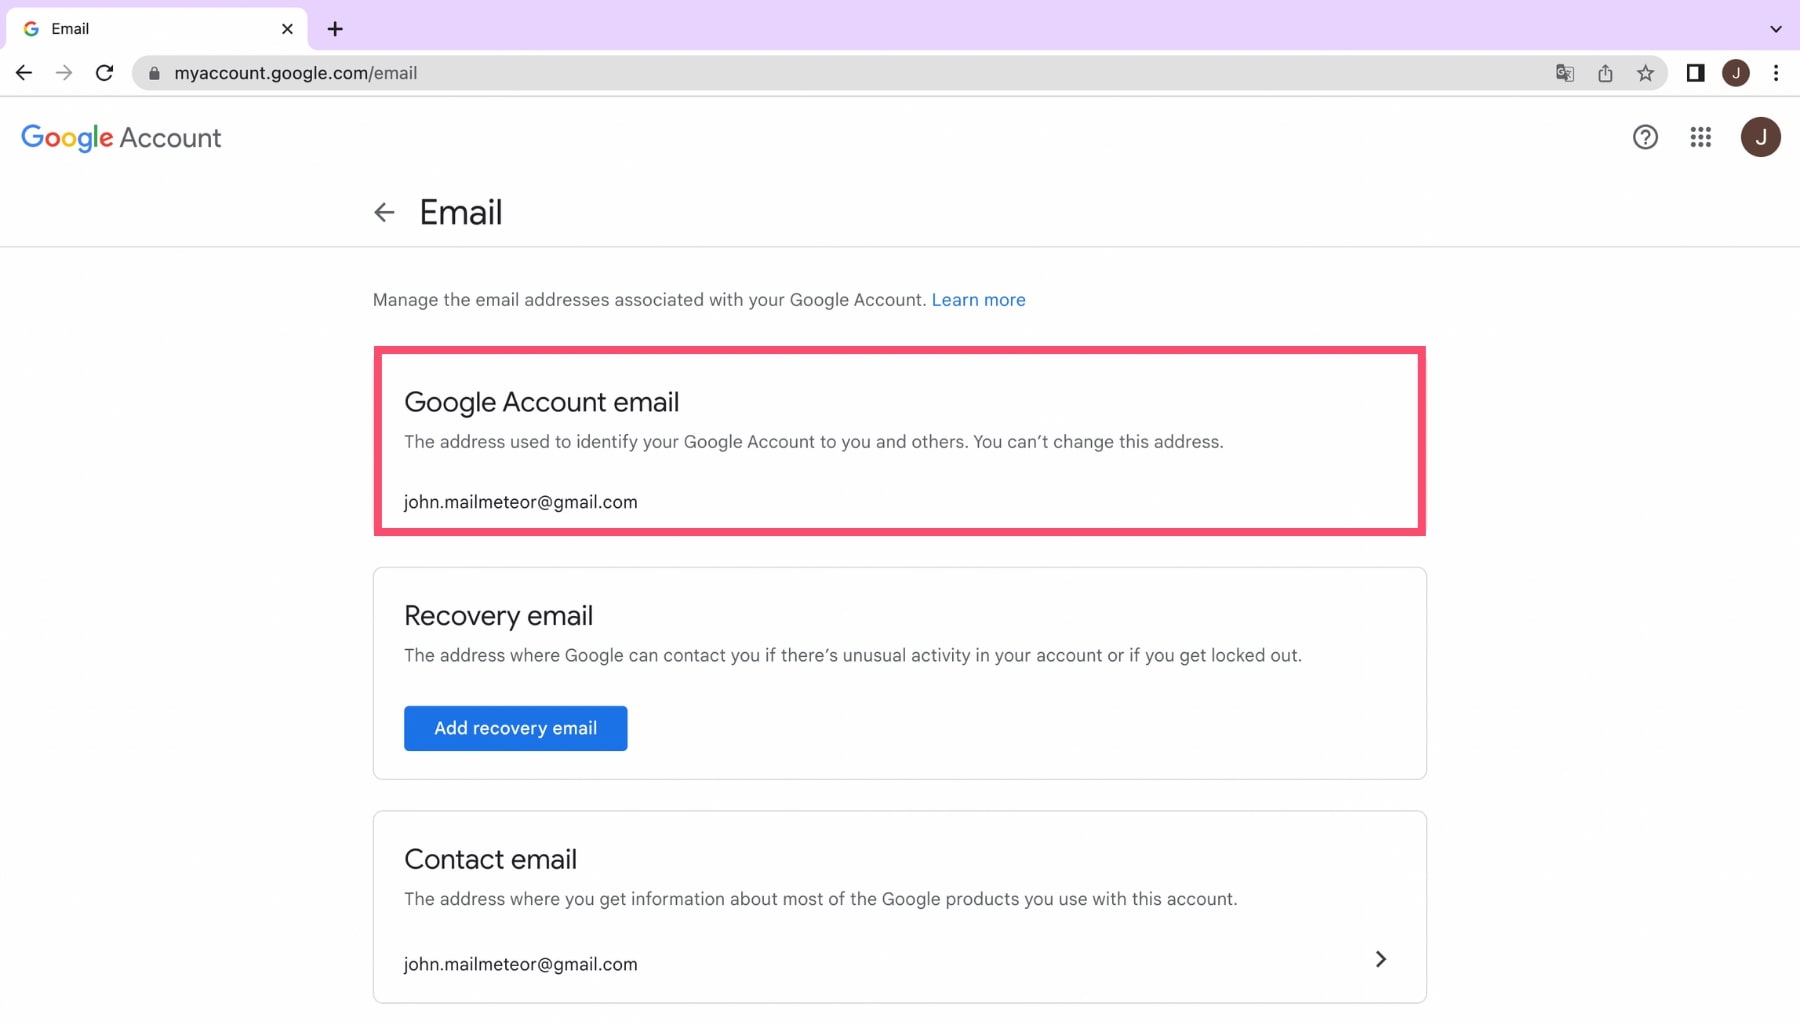 Change Gmail address from your Google Account